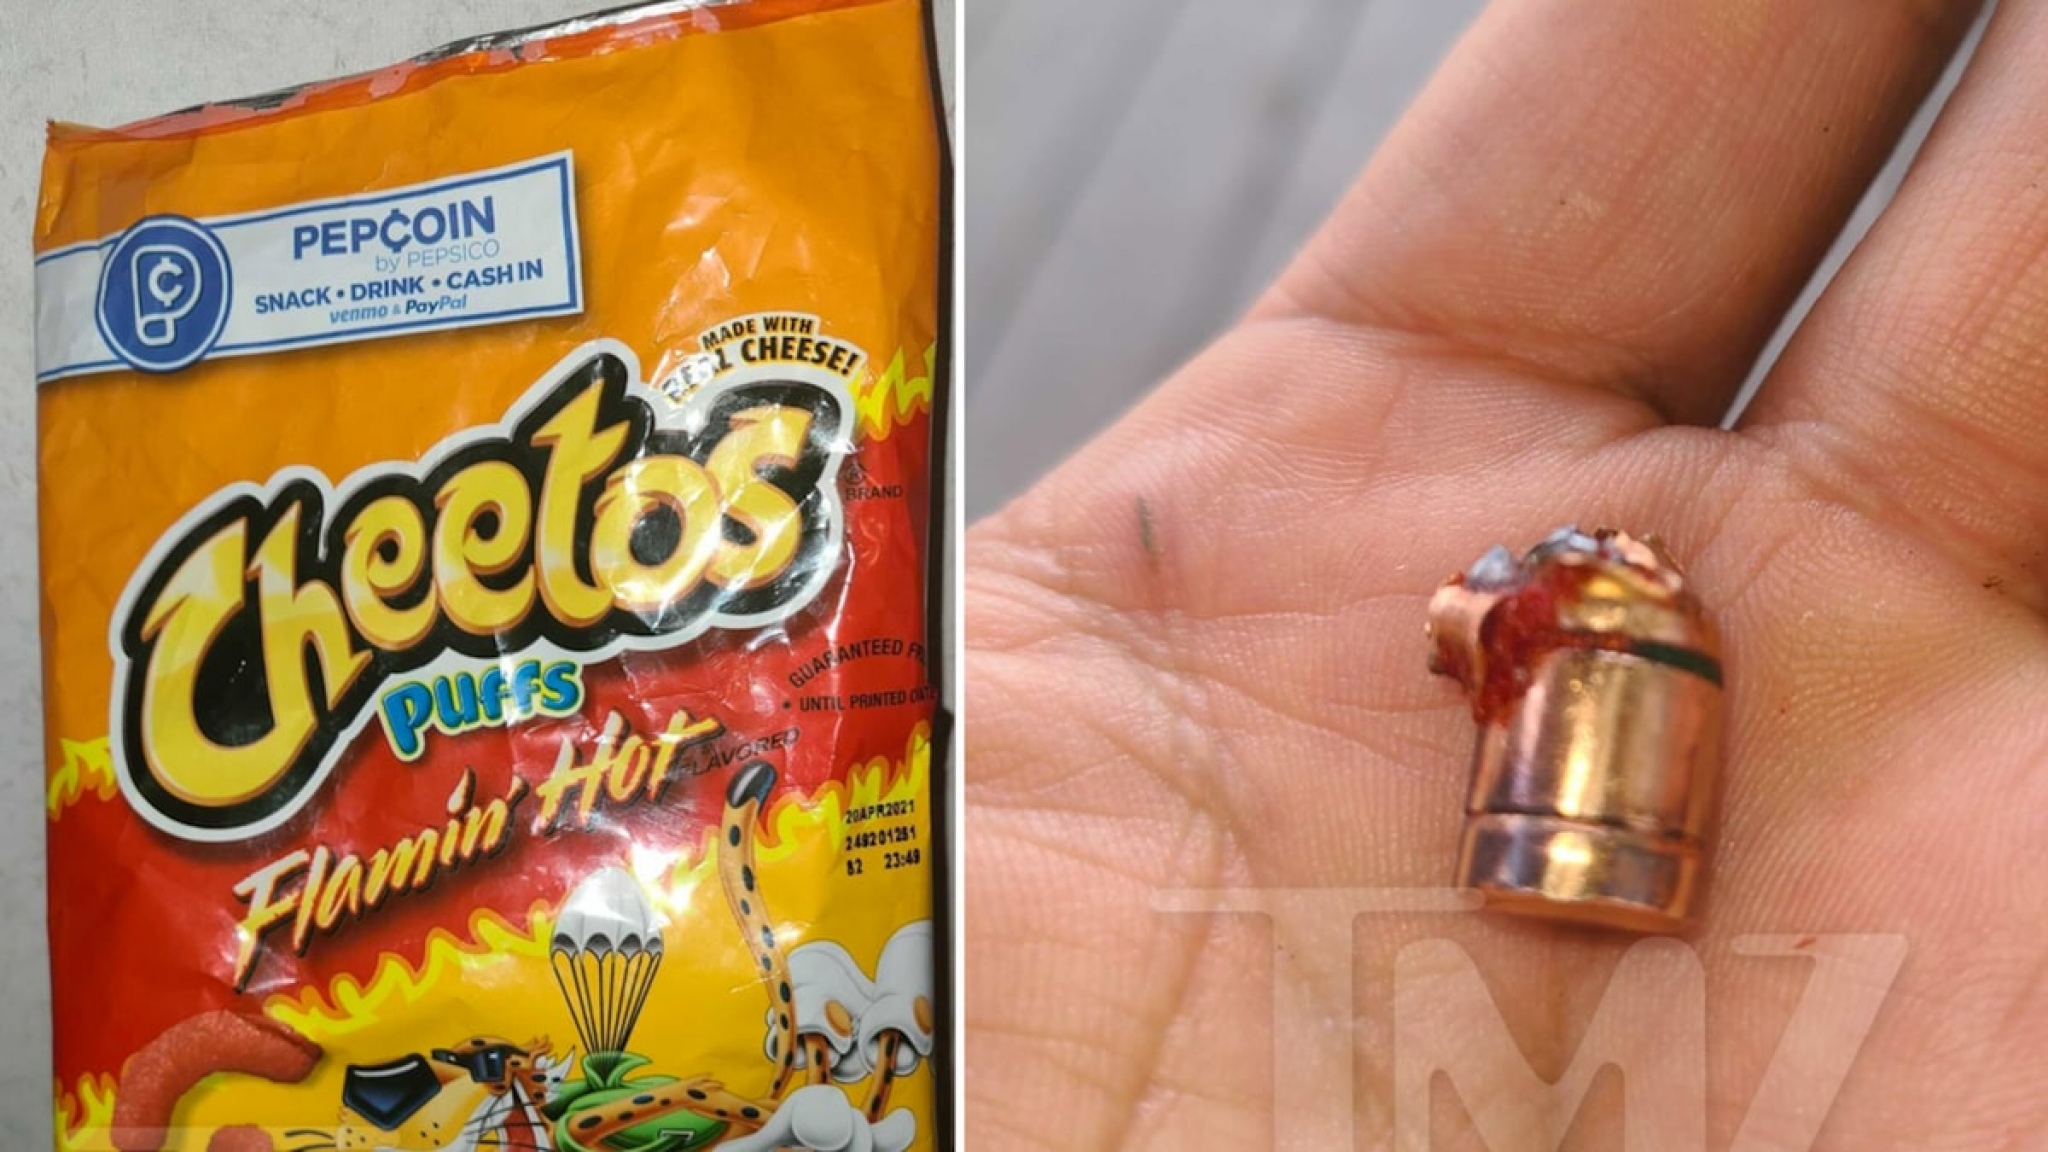 6-Year-old Boy Allegedly Finds Bullet in Hot Cheetos Bag